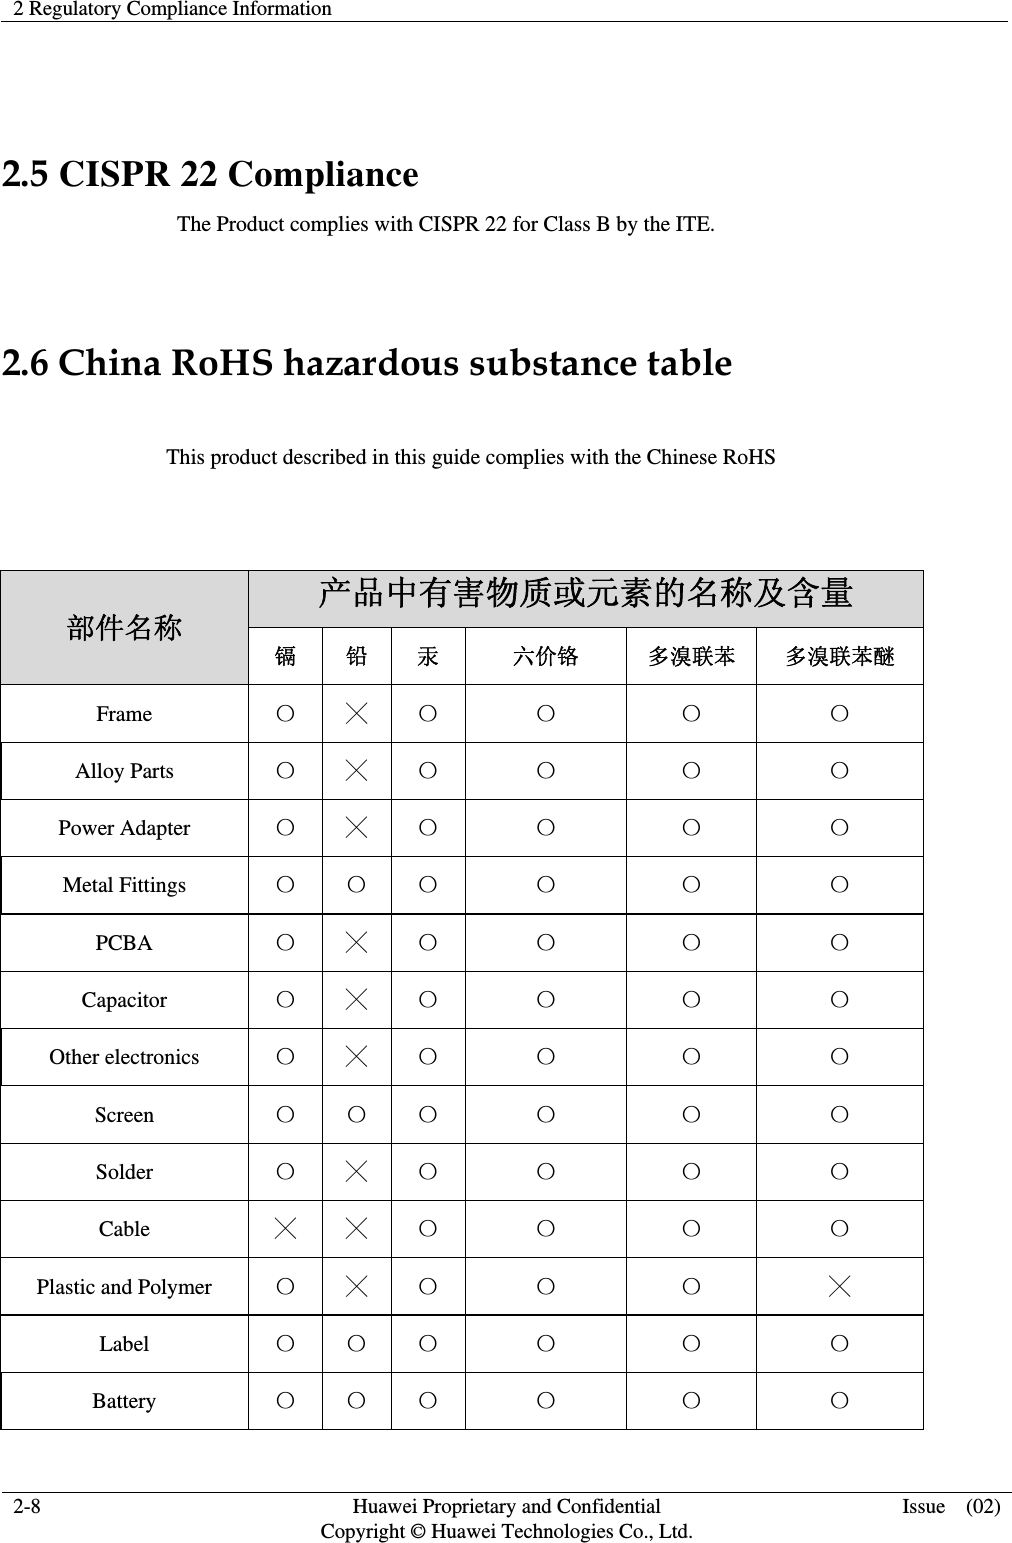 2 Regulatory Compliance Information   2-8  Huawei Proprietary and Confidential         Copyright © Huawei Technologies Co., Ltd. Issue  (02)  2.5 CISPR 22 Compliance                                 The Product complies with CISPR 22 for Class B by the ITE.  2.6 China RoHS hazardous substance table                 This product described in this guide complies with the Chinese RoHS   部件名称 产品中有害物质或元素的名称及含量 镉 铅 汞 六价铬 多溴联苯 多溴联苯醚 Frame  〇 ╳ 〇 〇 〇 〇 Alloy Parts  〇 ╳ 〇 〇 〇 〇 Power Adapter  〇 ╳ 〇 〇 〇 〇 Metal Fittings  〇 〇 〇 〇 〇 〇 PCBA  〇 ╳ 〇 〇 〇 〇 Capacitor  〇 ╳ 〇 〇 〇 〇 Other electronics  〇 ╳ 〇 〇 〇 〇 Screen  〇 〇 〇 〇 〇 〇 Solder  〇 ╳ 〇 〇 〇 〇 Cable  ╳ ╳ 〇 〇 〇 〇 Plastic and Polymer  〇 ╳ 〇 〇 〇 ╳ Label  〇 〇 〇 〇 〇 〇 Battery  〇 〇 〇 〇 〇 〇 